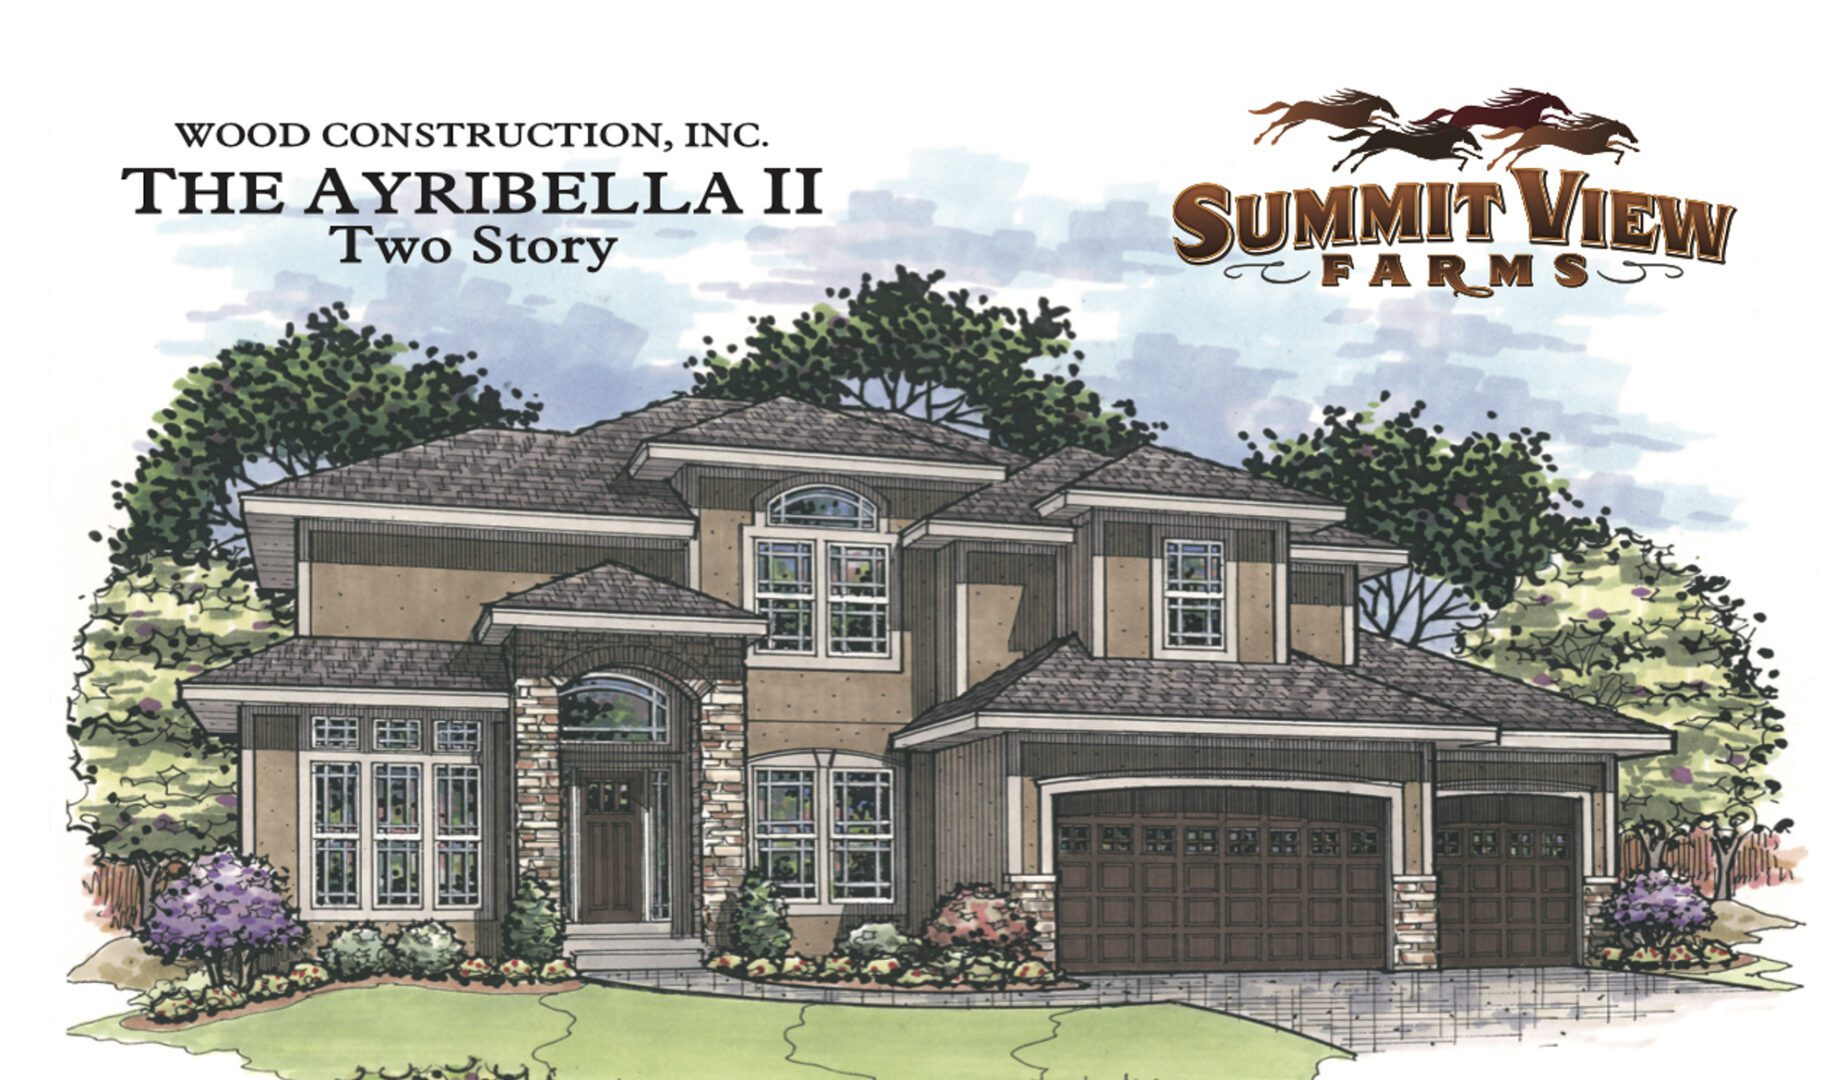 The arbella ii two story home.